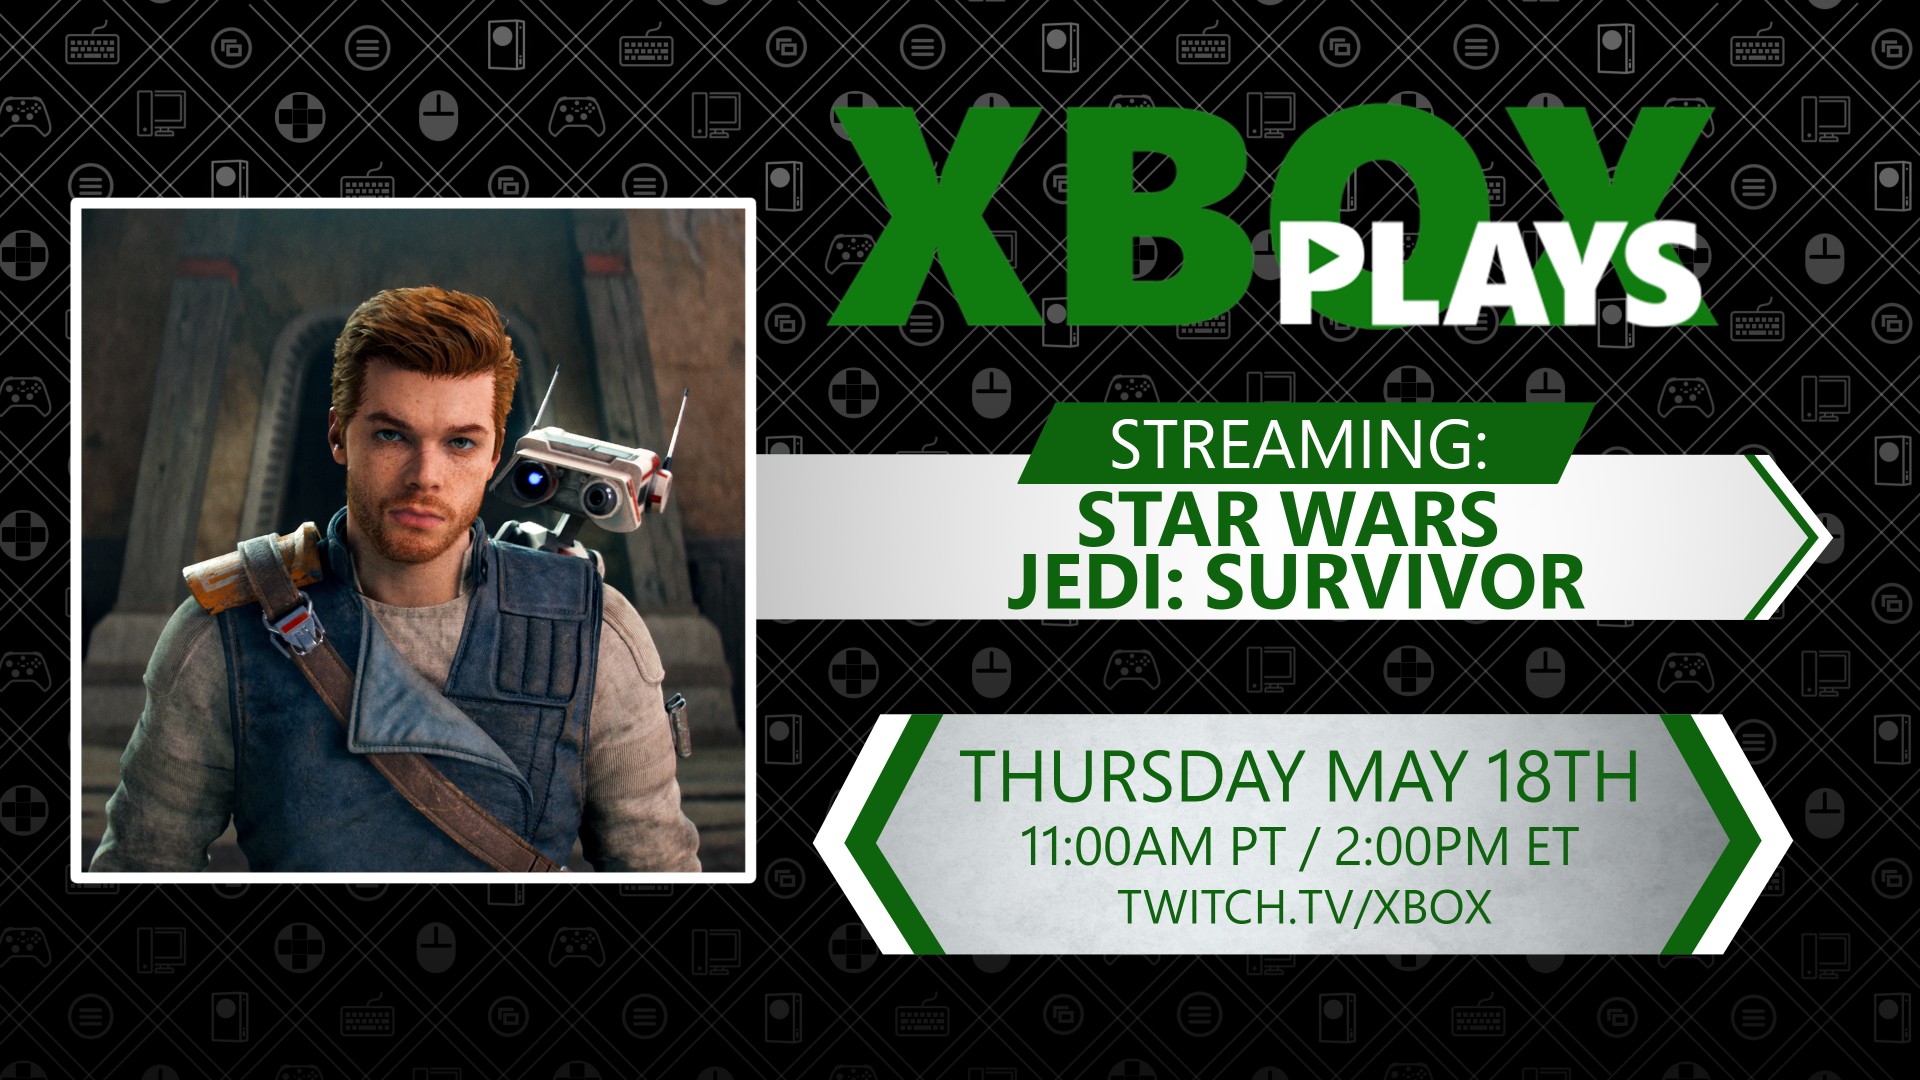 Image of Cal Kestis, with details of the Xbox Plays Star Wars Jedi: Survivor livestream, taking place Thursday, May 18 at 11 am PT / 2 pm PT on Twitch.TV/Xbox